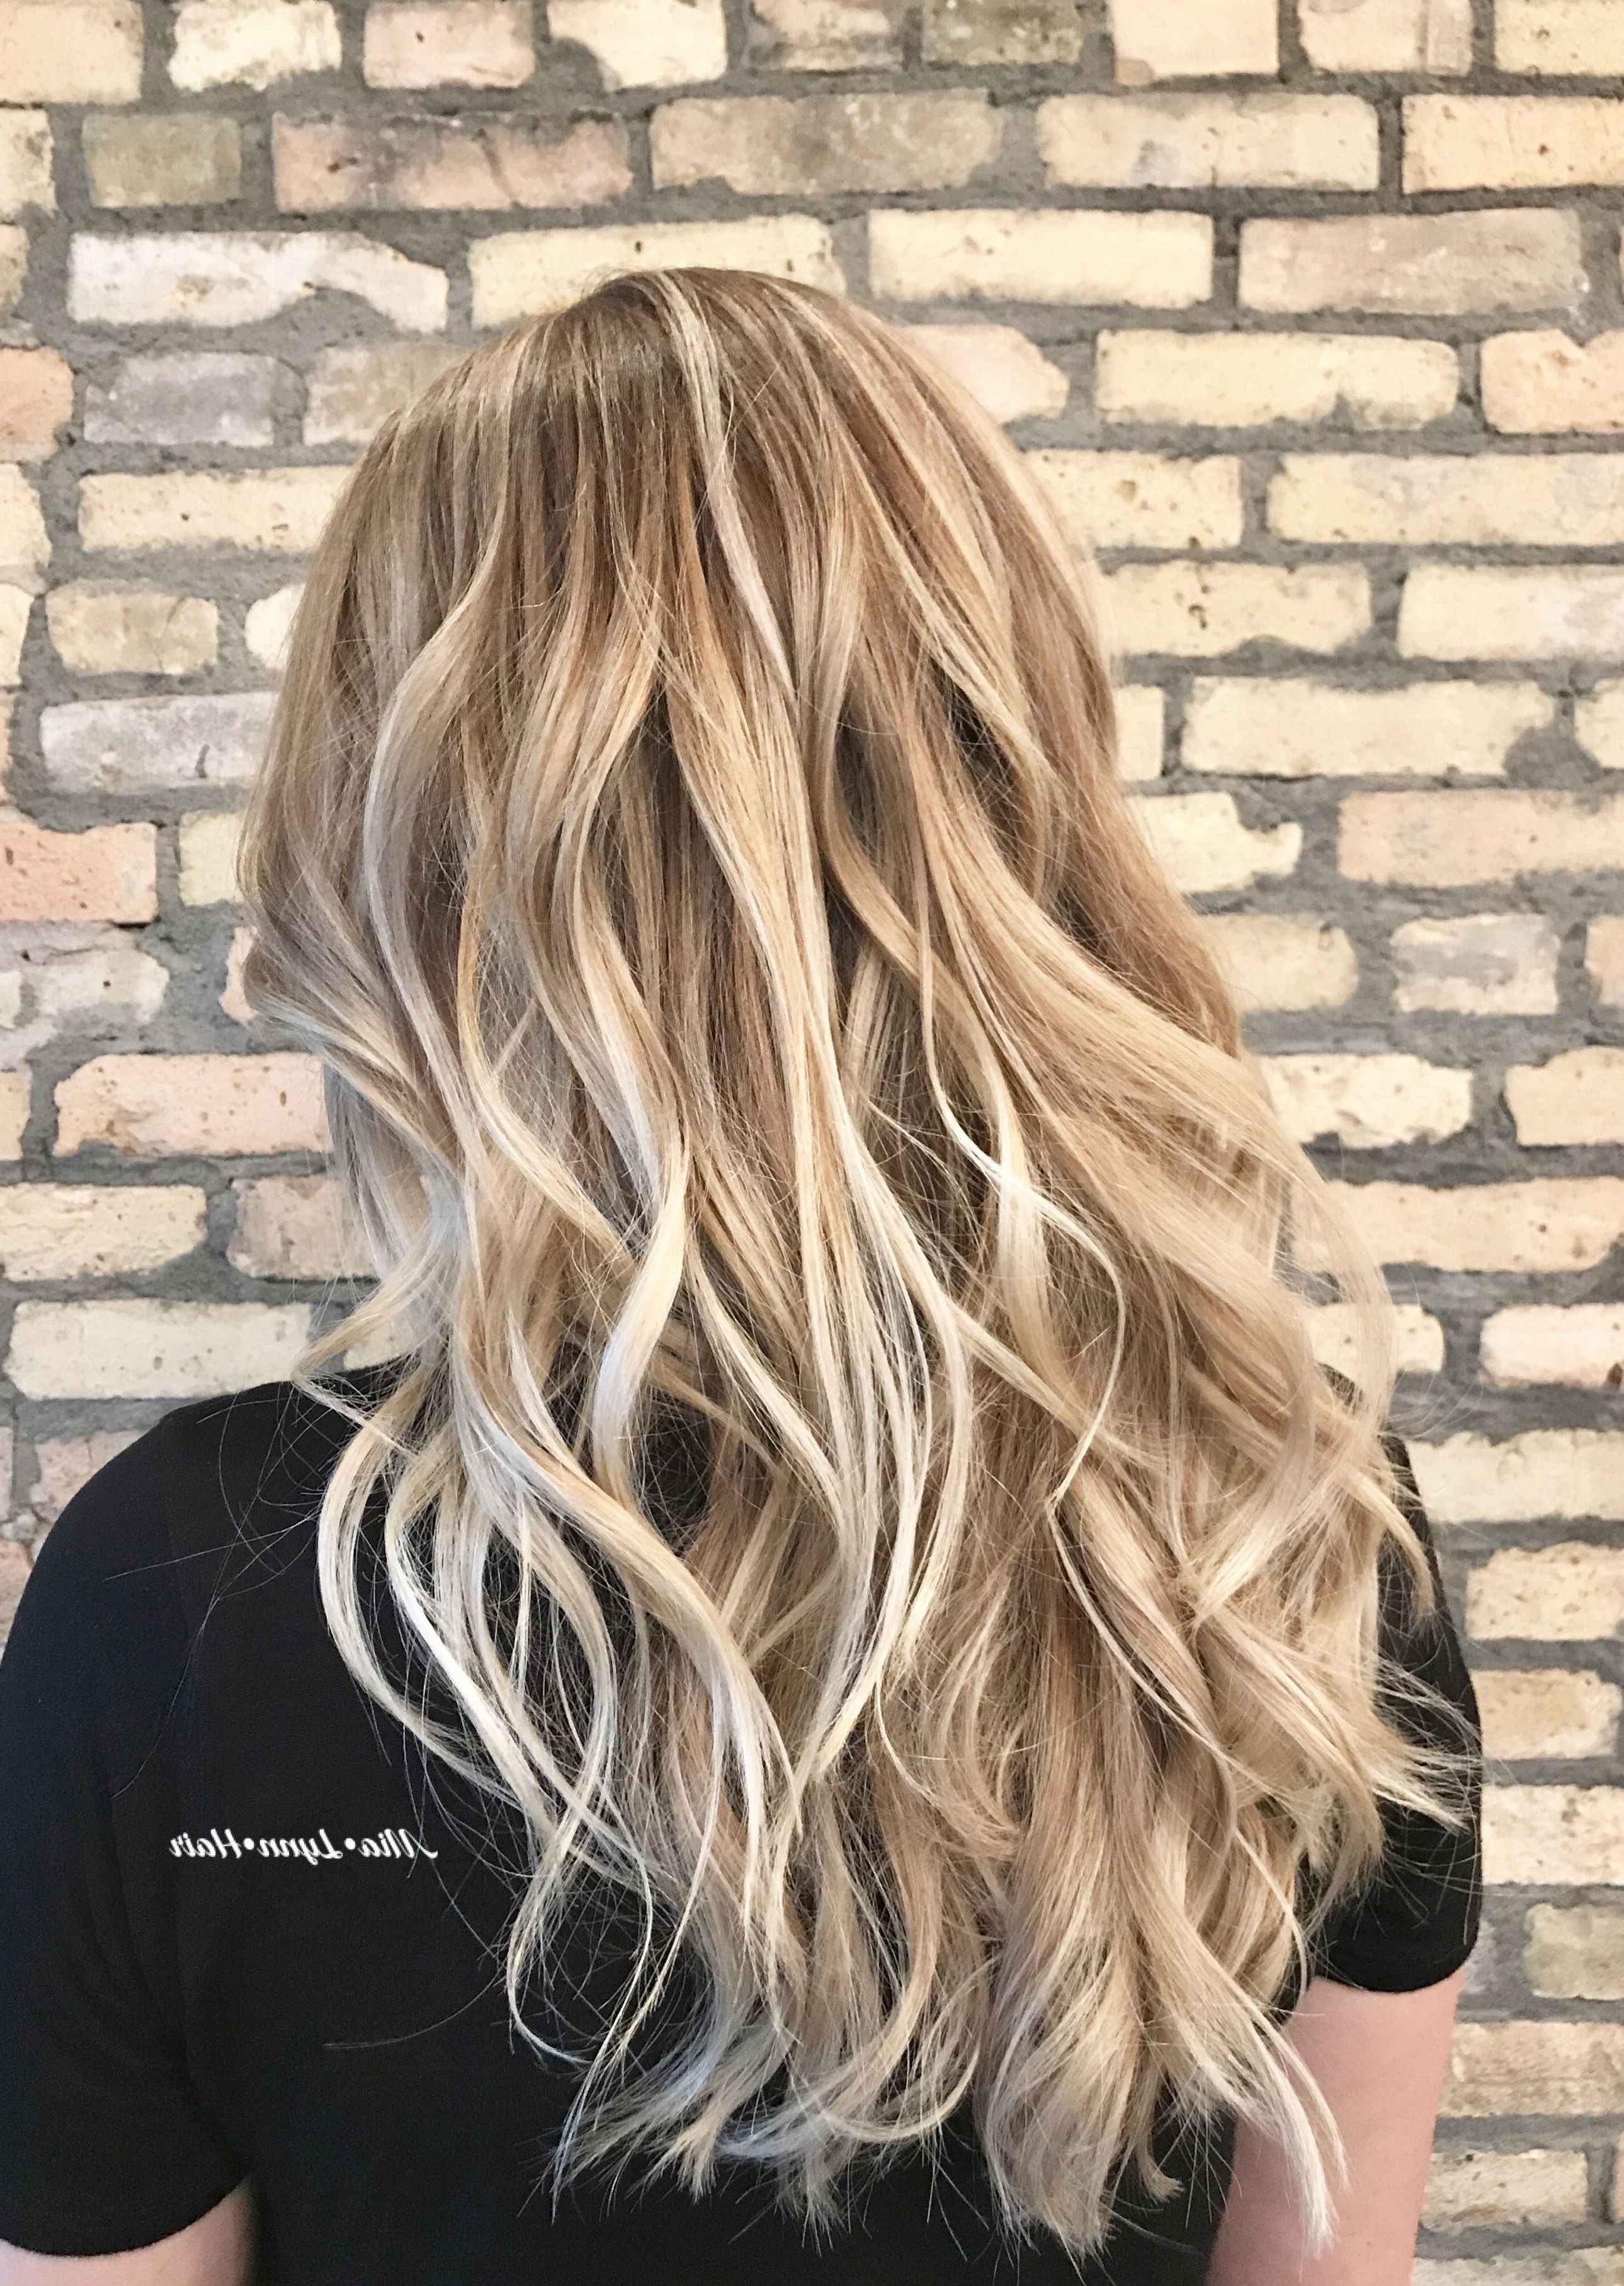 2018 Casual Bright Waves Blonde Hairstyles With Bangs Pertaining To Blonde, Dimensional Blonde, Balayage, Blonde Balayage, Face Framing (View 1 of 20)